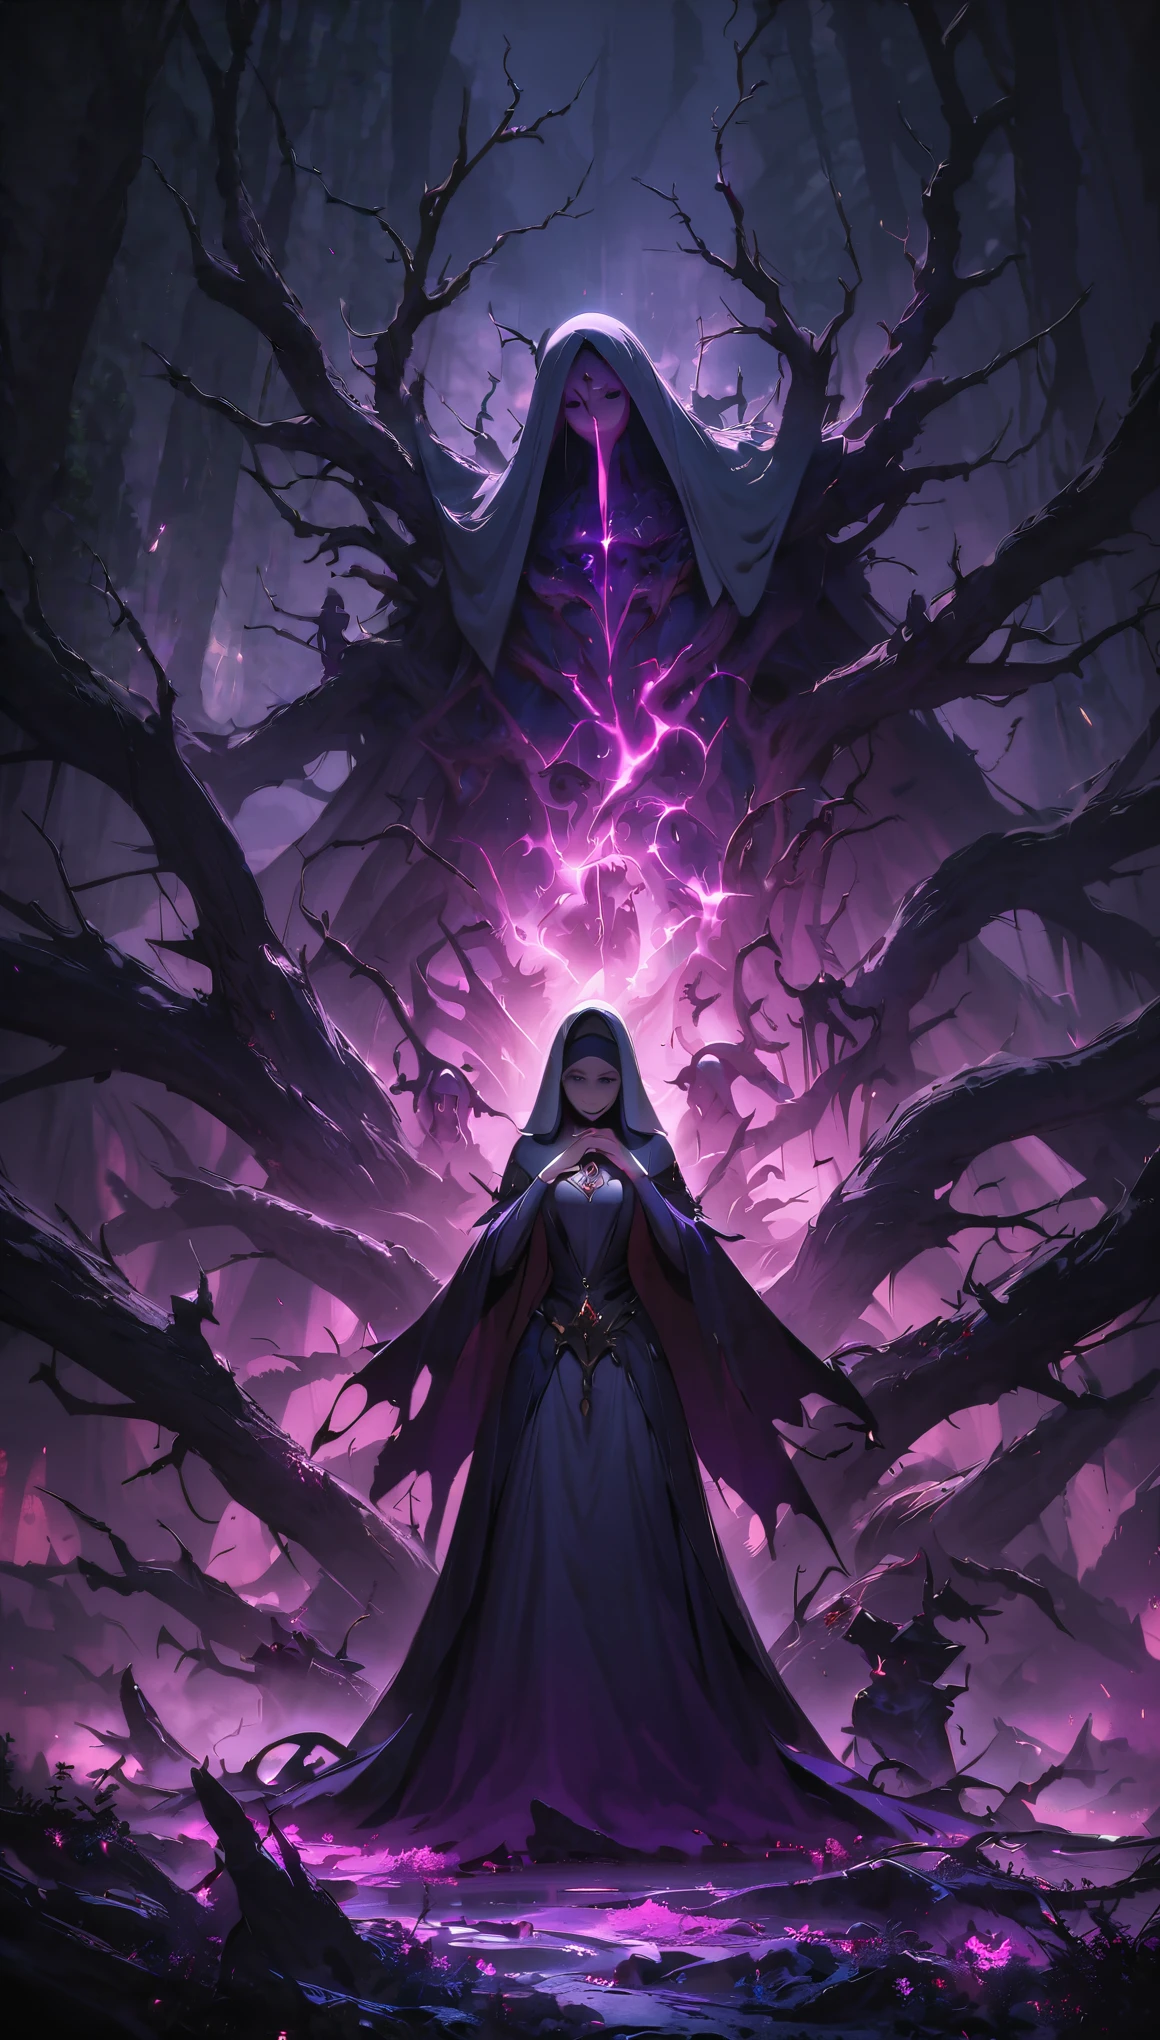 (best quality, masterpiece), dark fantasy world, nun of Fallen God, pray near broken statue of her God, (eerie mist shrouding the ancient trees ,twisted and gnarled branches), (hints of magical aura,evoking a sense of mystery), (sinister and otherworldly, supernatural presence, ethereal ambiance)